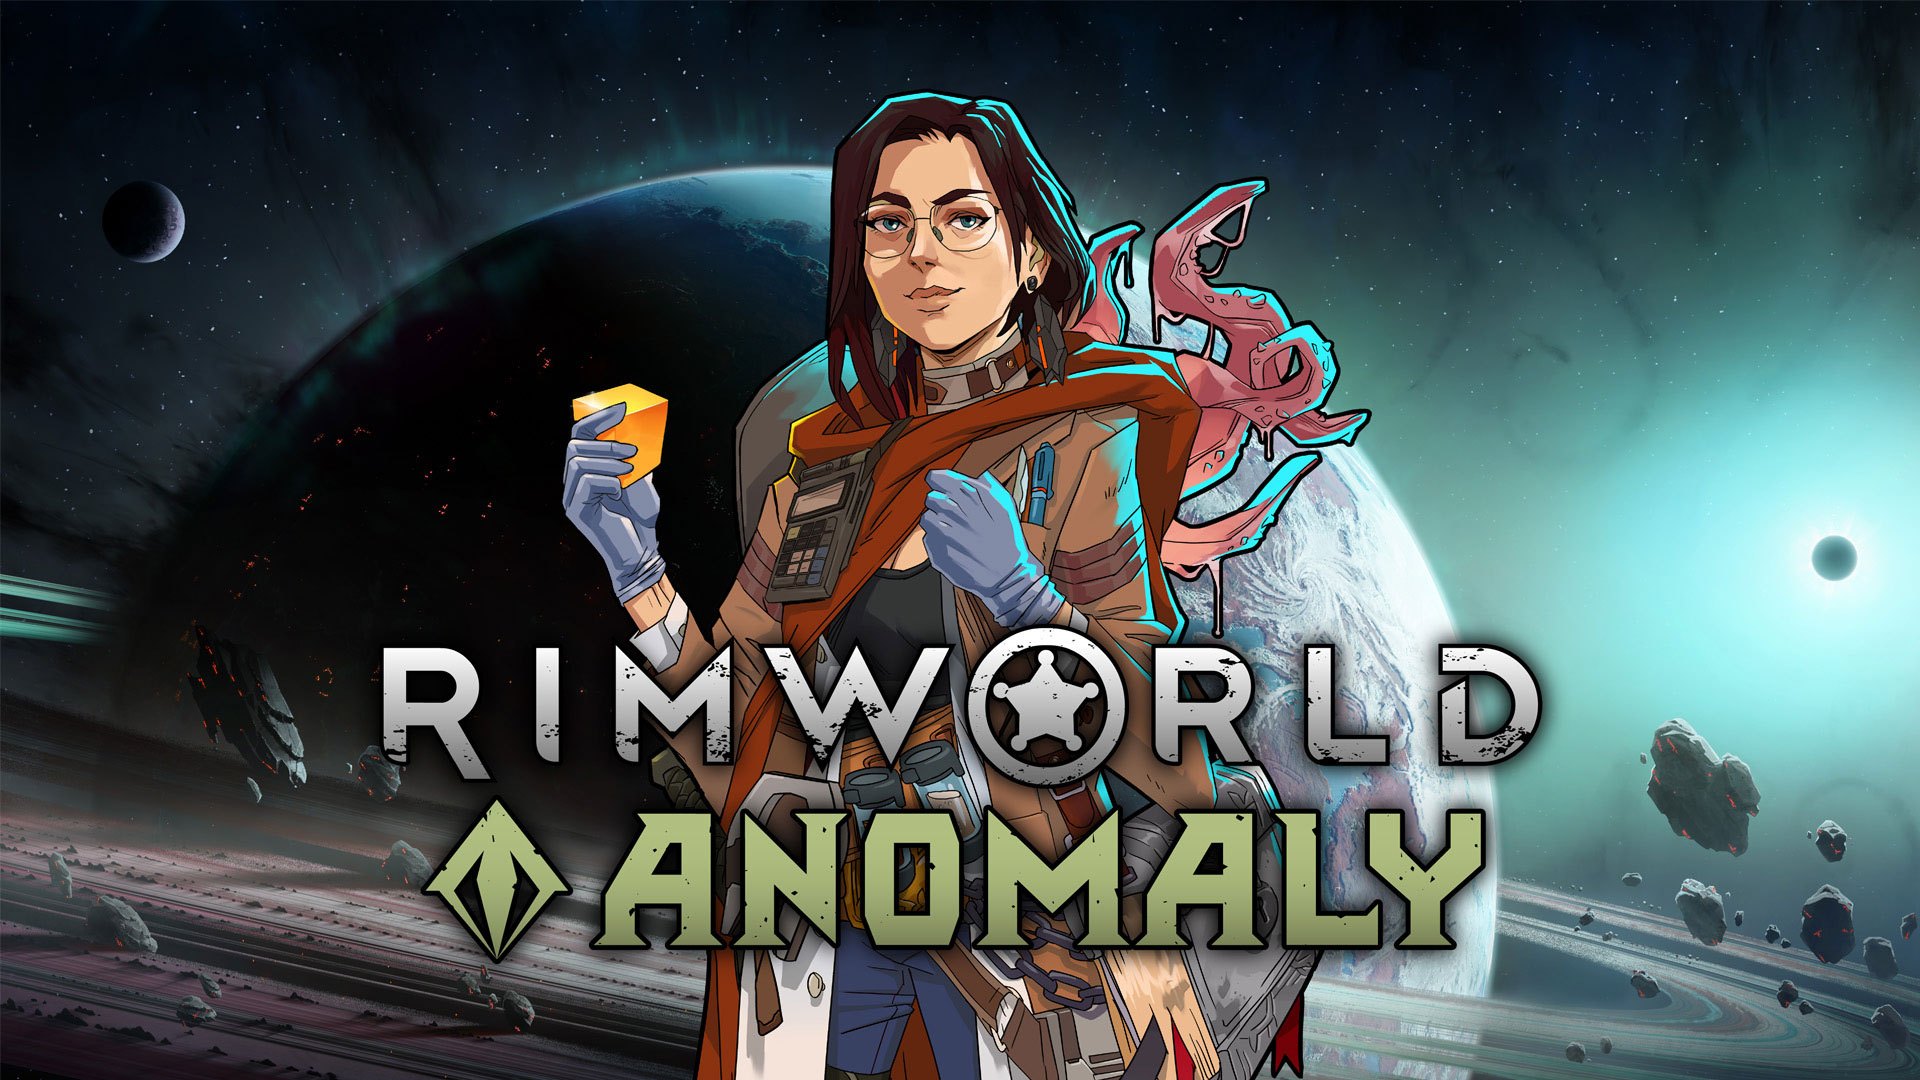 RimWorld is getting a horror-themed expansion called Anomaly